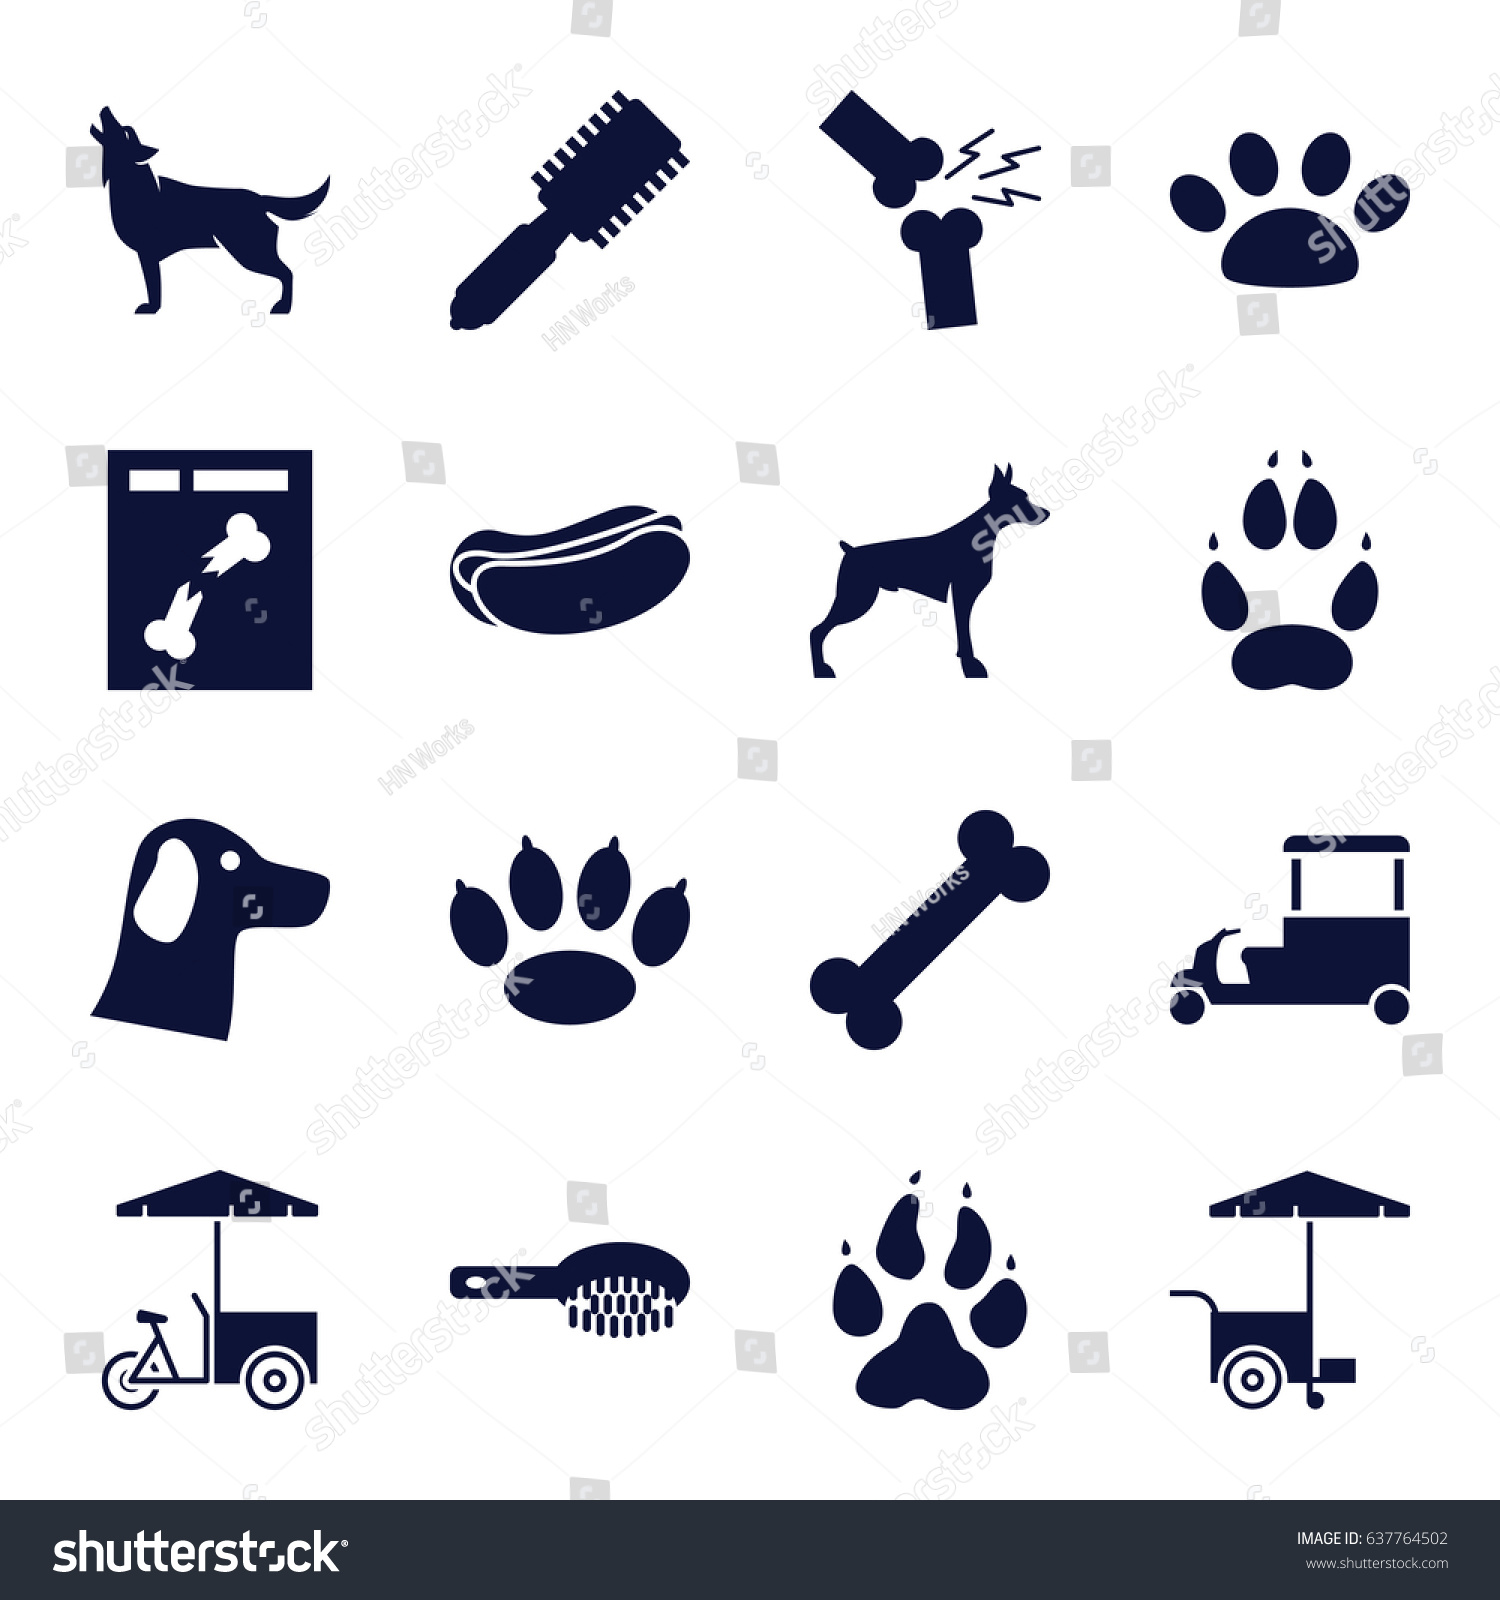 SVG of Dog icons set. set of 16 dog filled icons such as animal paw, wolf, hair brush, fast food cart, x ray, broken leg or arm, paw svg